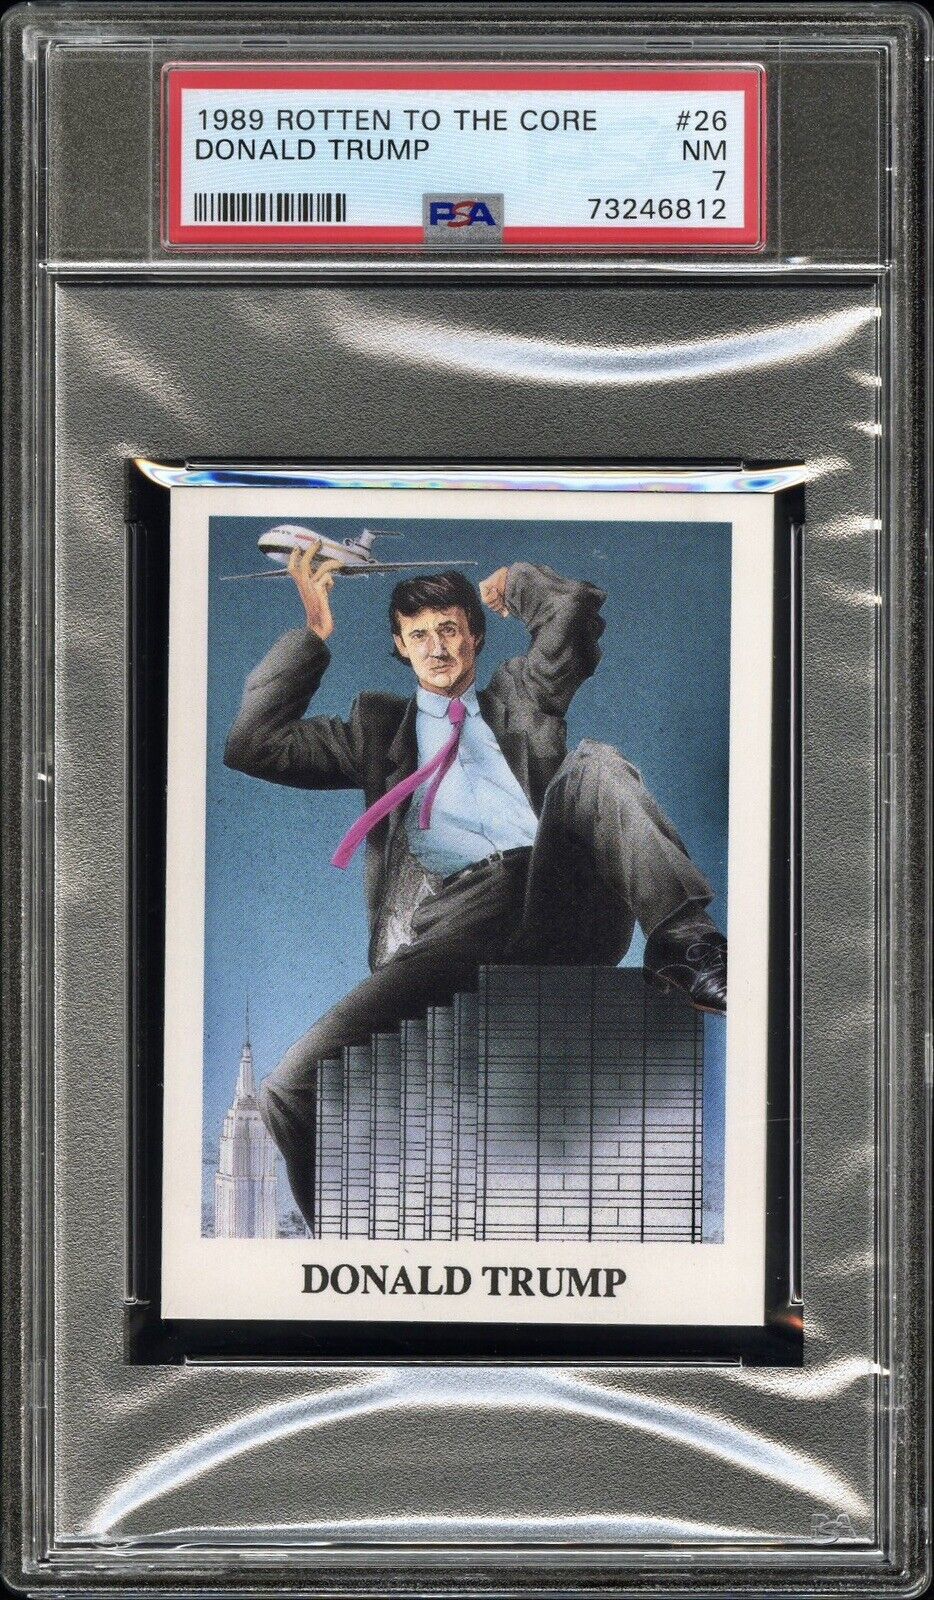 RARE 1989 Donald Trump PSA 7 Rotten to the Core #26 ROOKIE Vintage ￼Trading Card